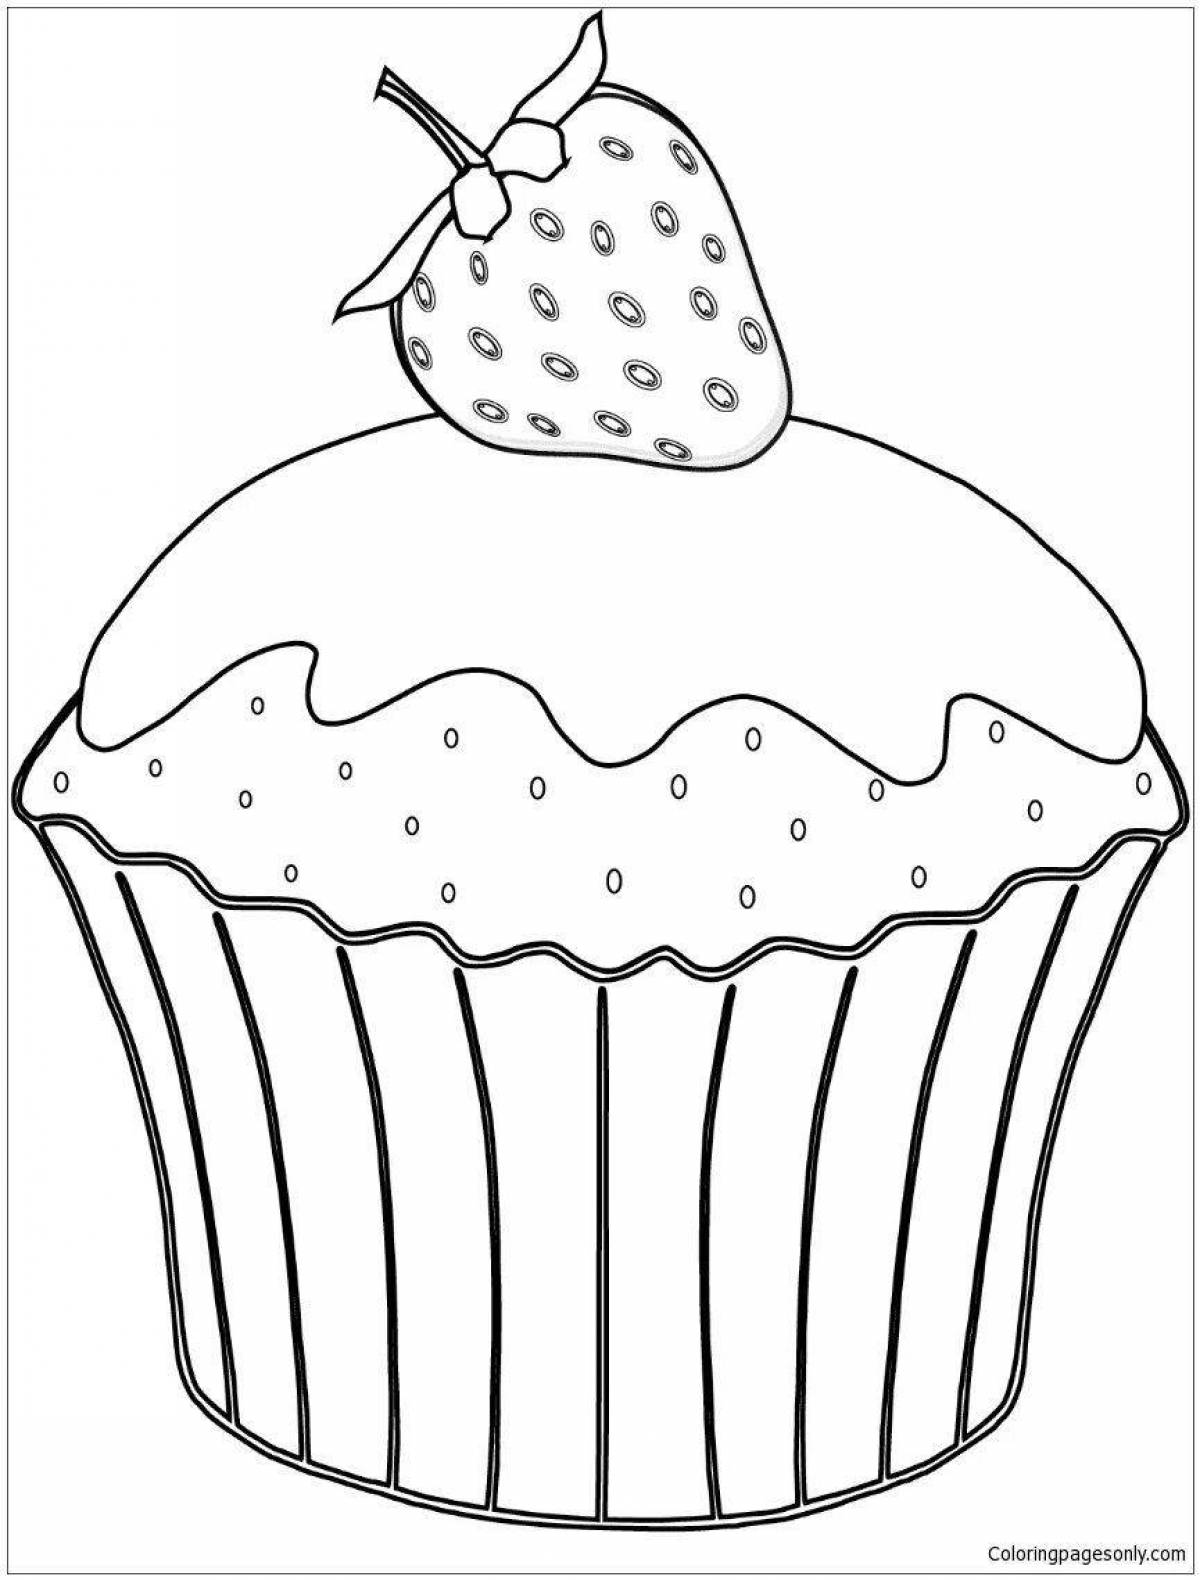 Multicolored cupcakes coloring pages for kids